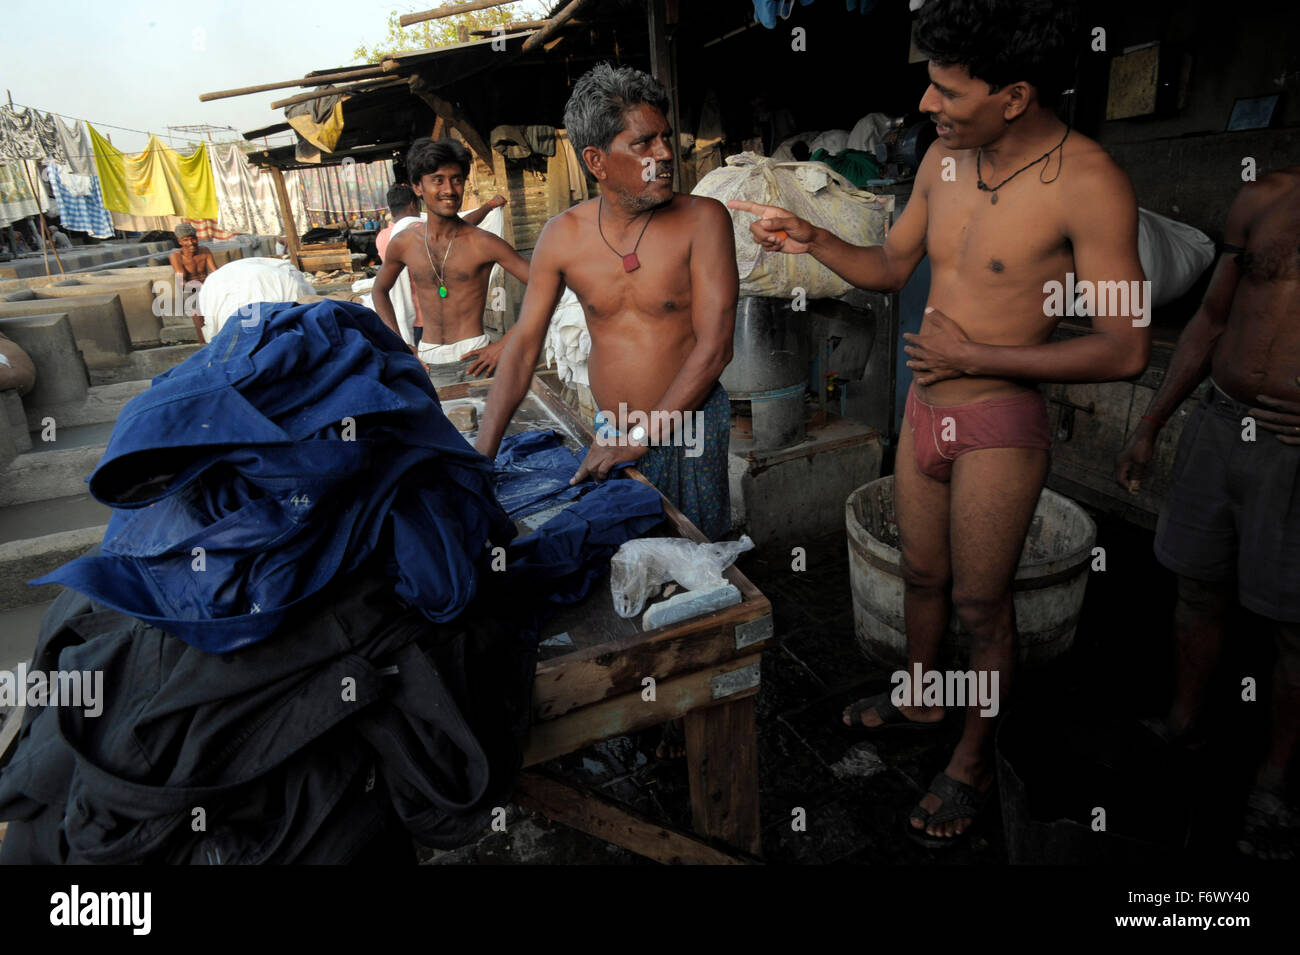 view of Dhobi Ghats around Mahalaxmi station where every day from dawn till dusk some 5000 dhobi-wallahs pound the city's laundry from hospital sheets to up market hotels. Row upon row of open air concrete wash pens each fitted with its own flogging stone.Clothes are first flogged then tossed into vats of boiling starch and then finally hung out to dry they are washed in any one of 7 types of chemical baths according to fabric type. Heavy wood burning irons are used for pressing. Stock Photo